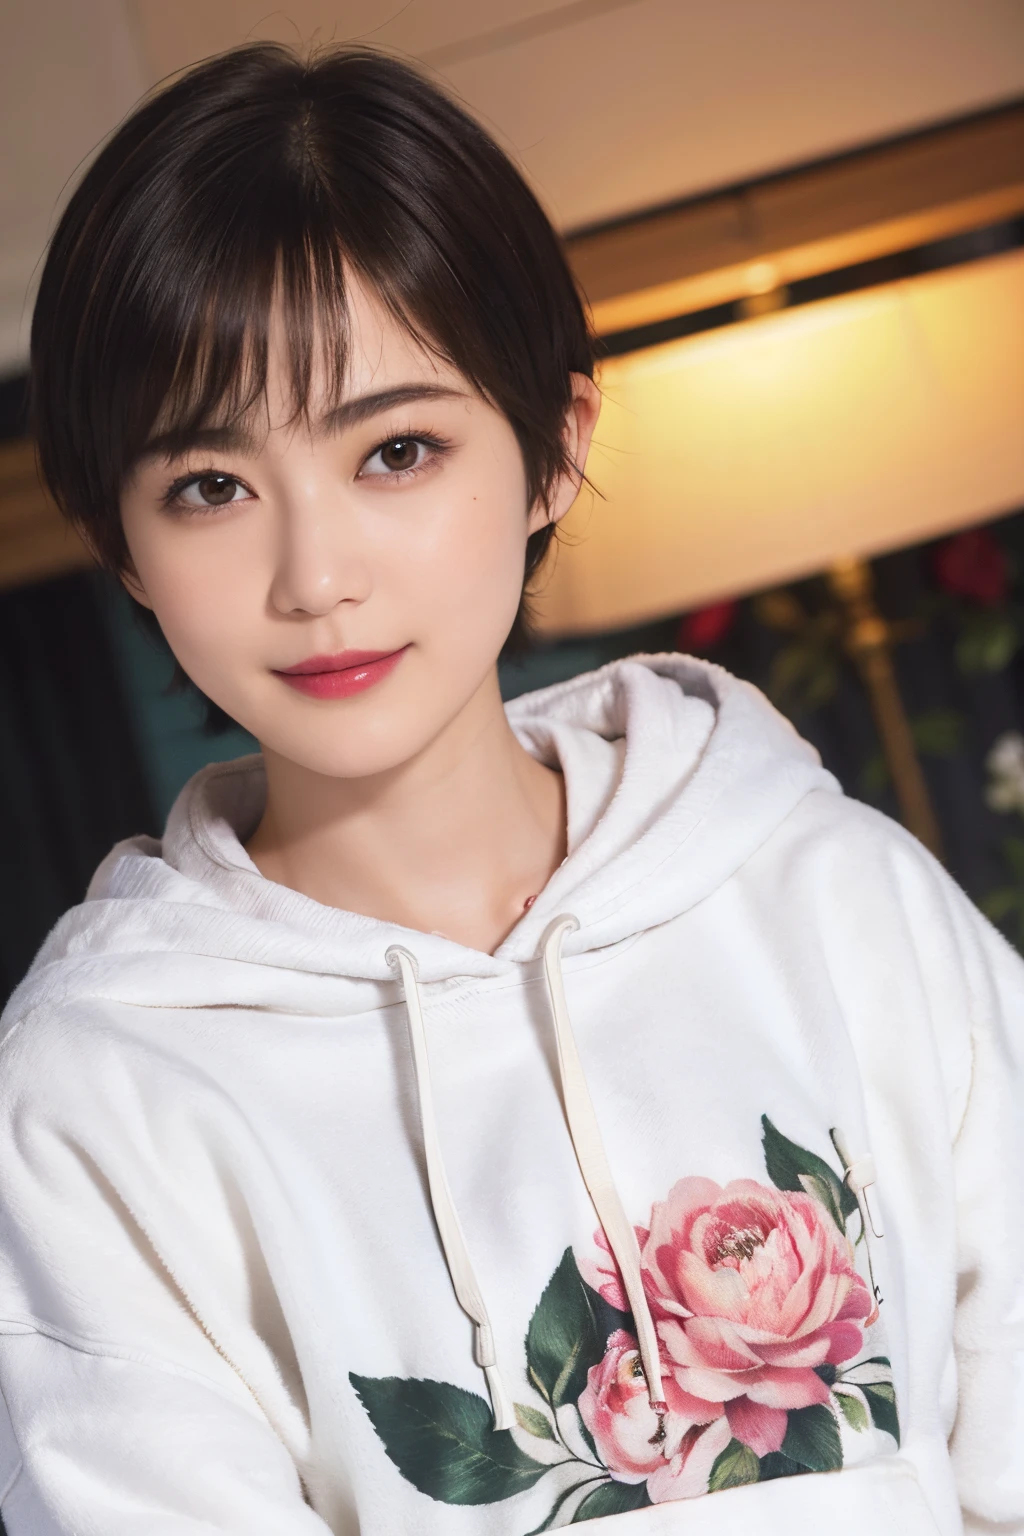 131
(a 20 yo woman,Wearing sportswear), (A hyper-realistic), (high-level image quality), ((beautiful hairstyle 46)), ((short-hair:1.46)), (Gentle smile), (brest:1.1), (lipsticks), (florals), (Large room), (florals), (wearing hoodies)